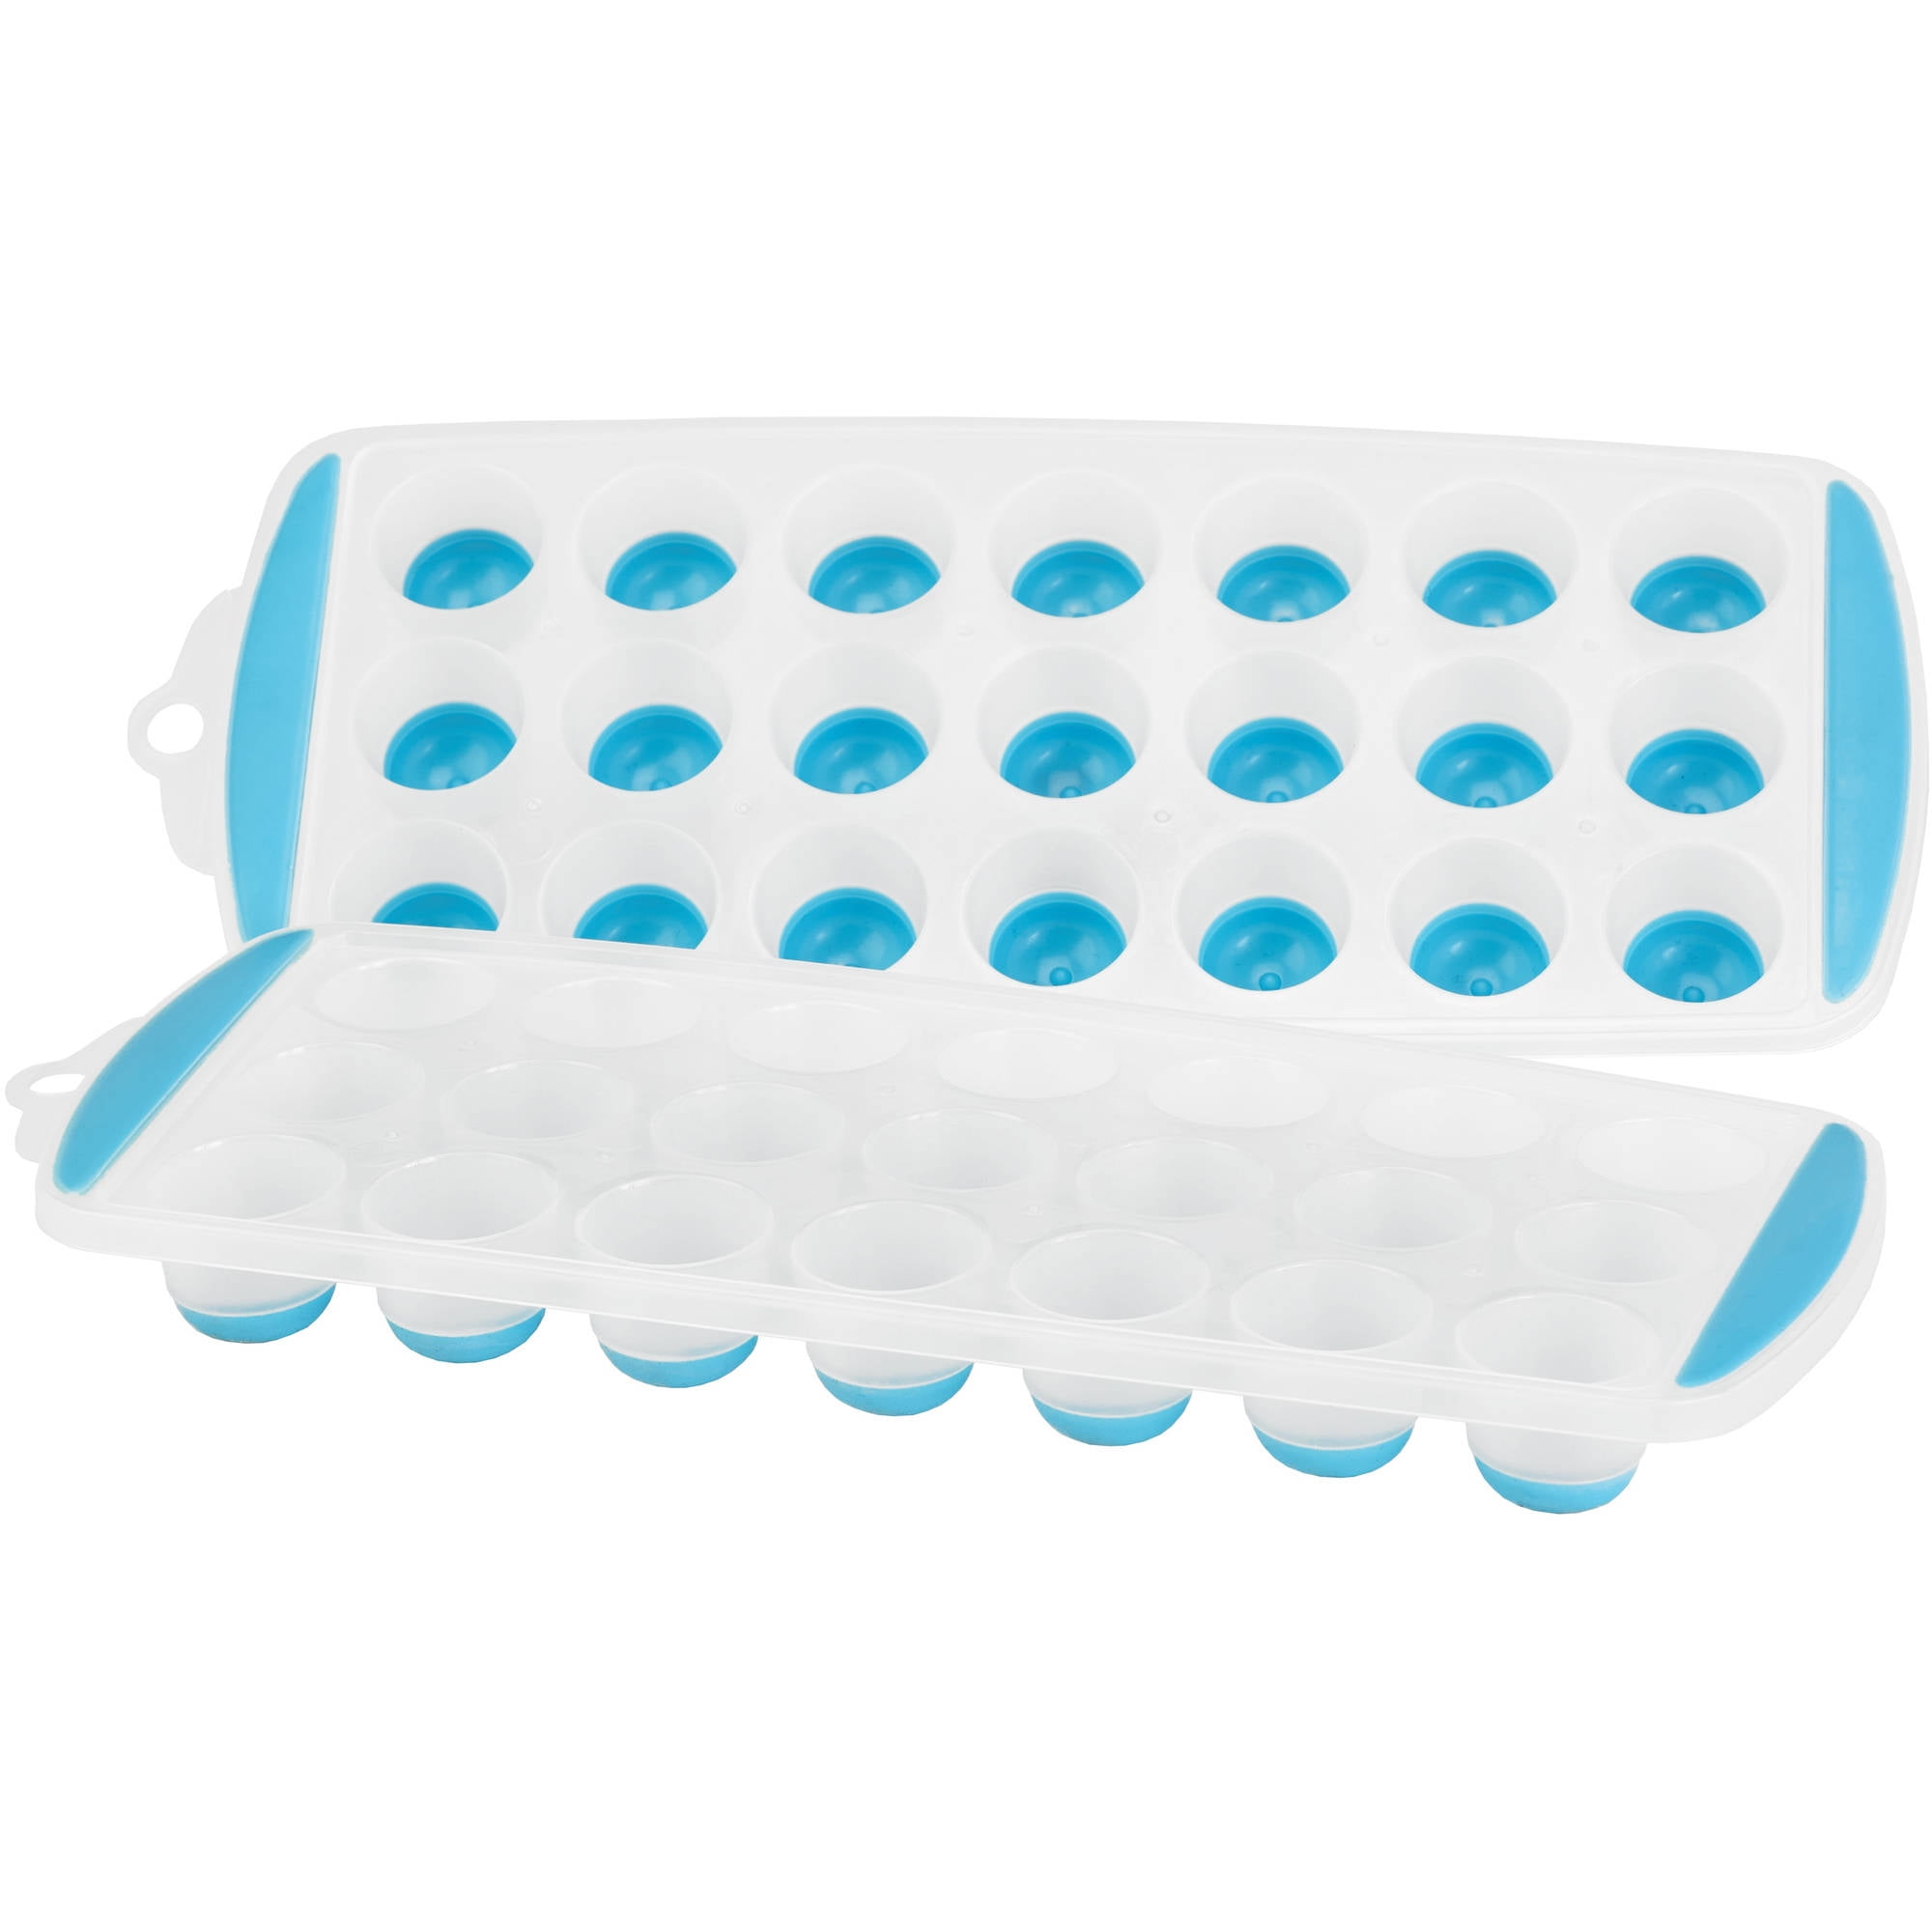 Blue Silicone Ice Cube Tray with Lid 21 Cubes,Flexible,Reusable,Size:10.2x5.2" 